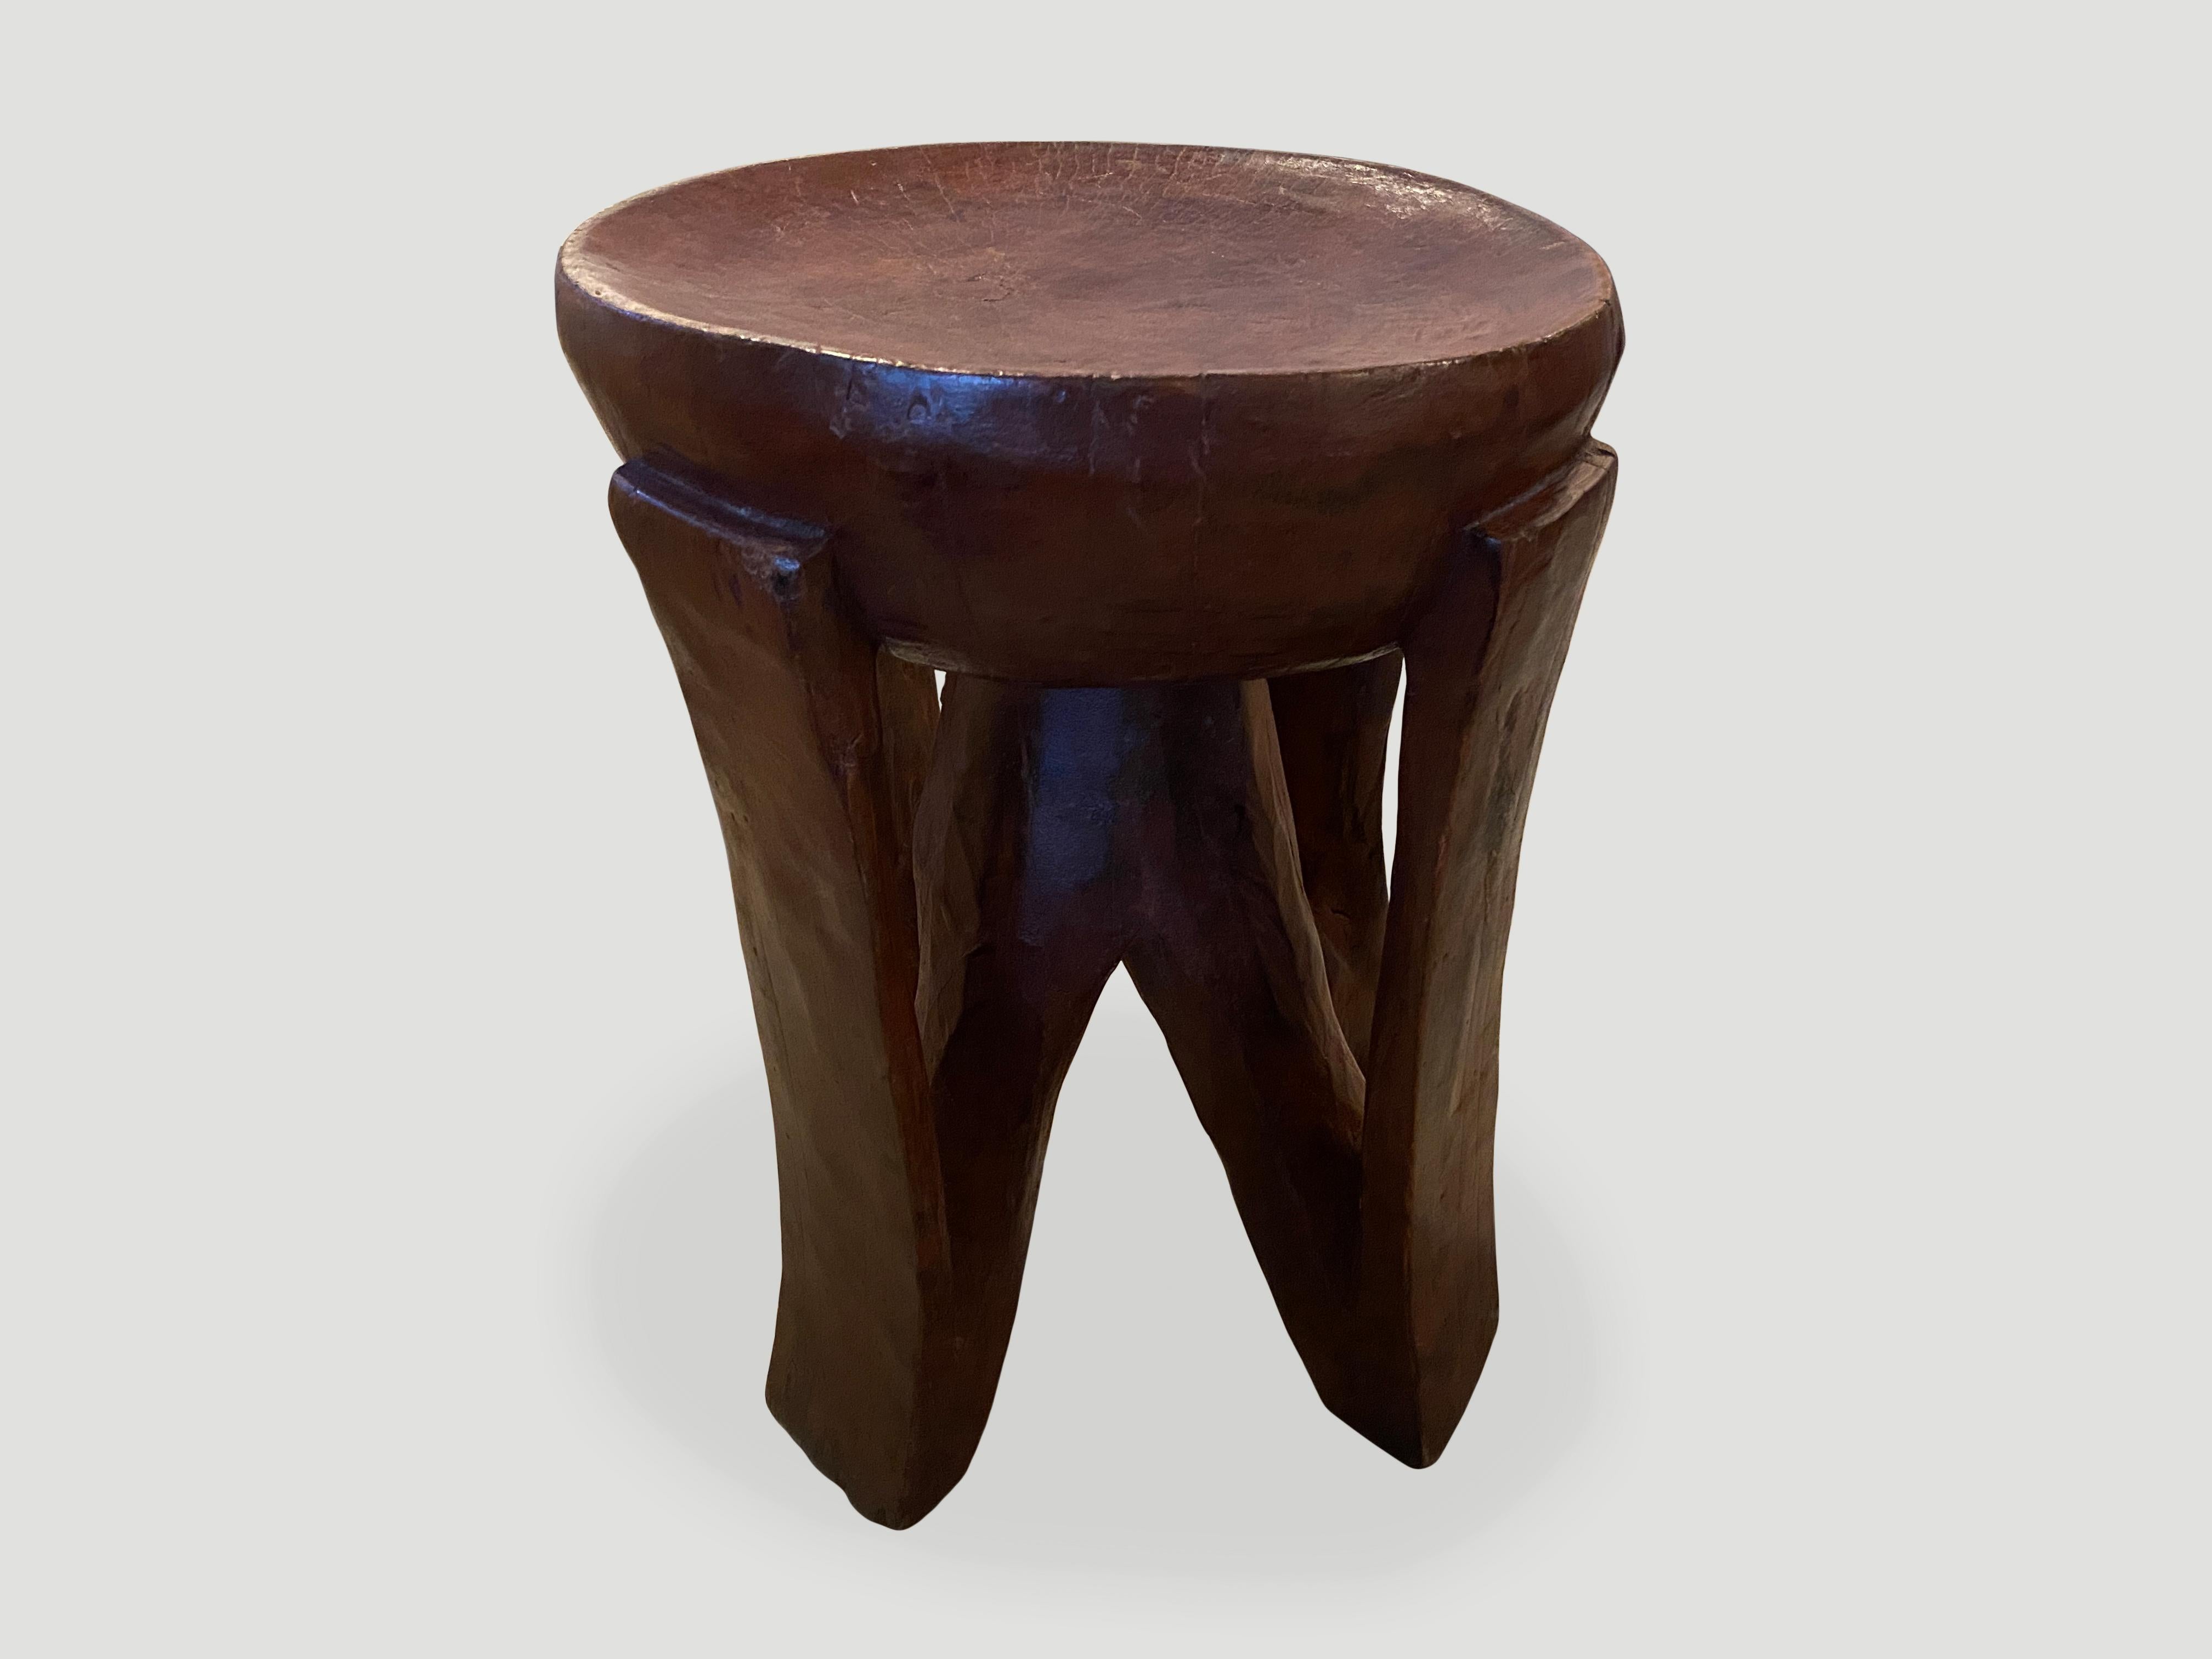 Beautiful patina on this hand carved African side table or pedestal. Rare large scale, hand carved out of a single block of mahogany wood. We only source the best.

This side table or pedestal was sourced in the spirit of wabi-sabi, a Japanese